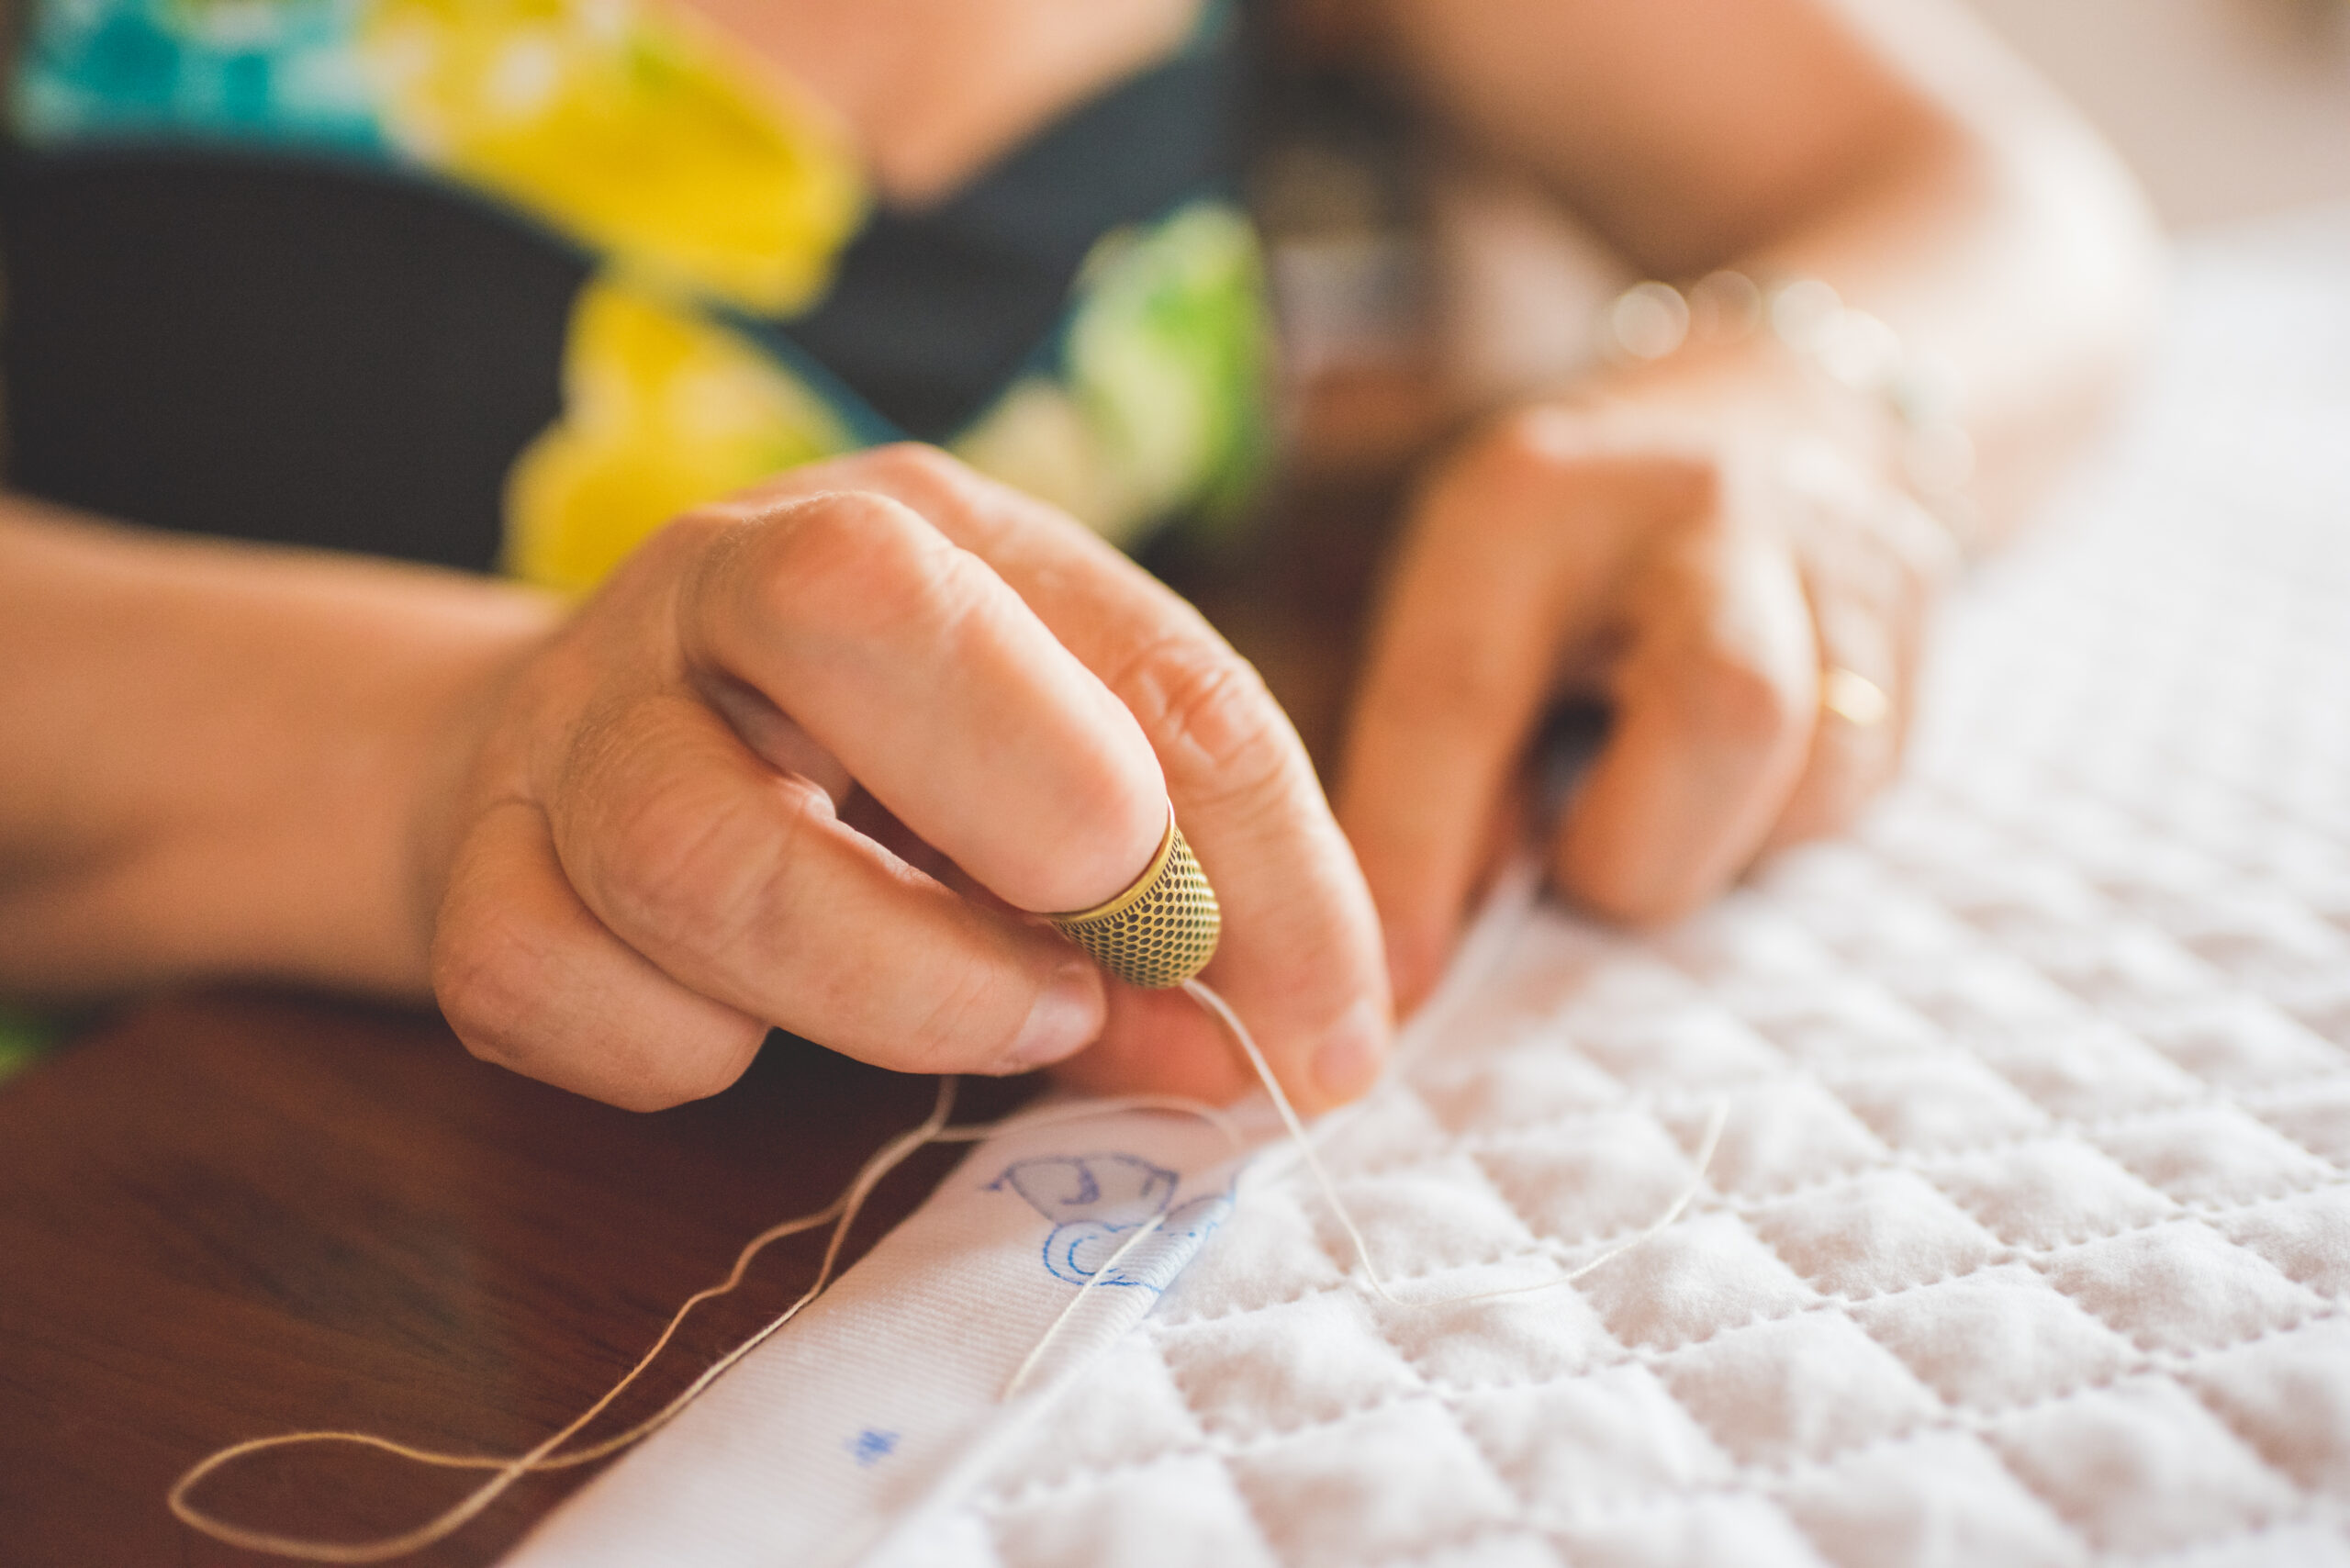 Photo is a close up of a woman's hands stitching a quilt.